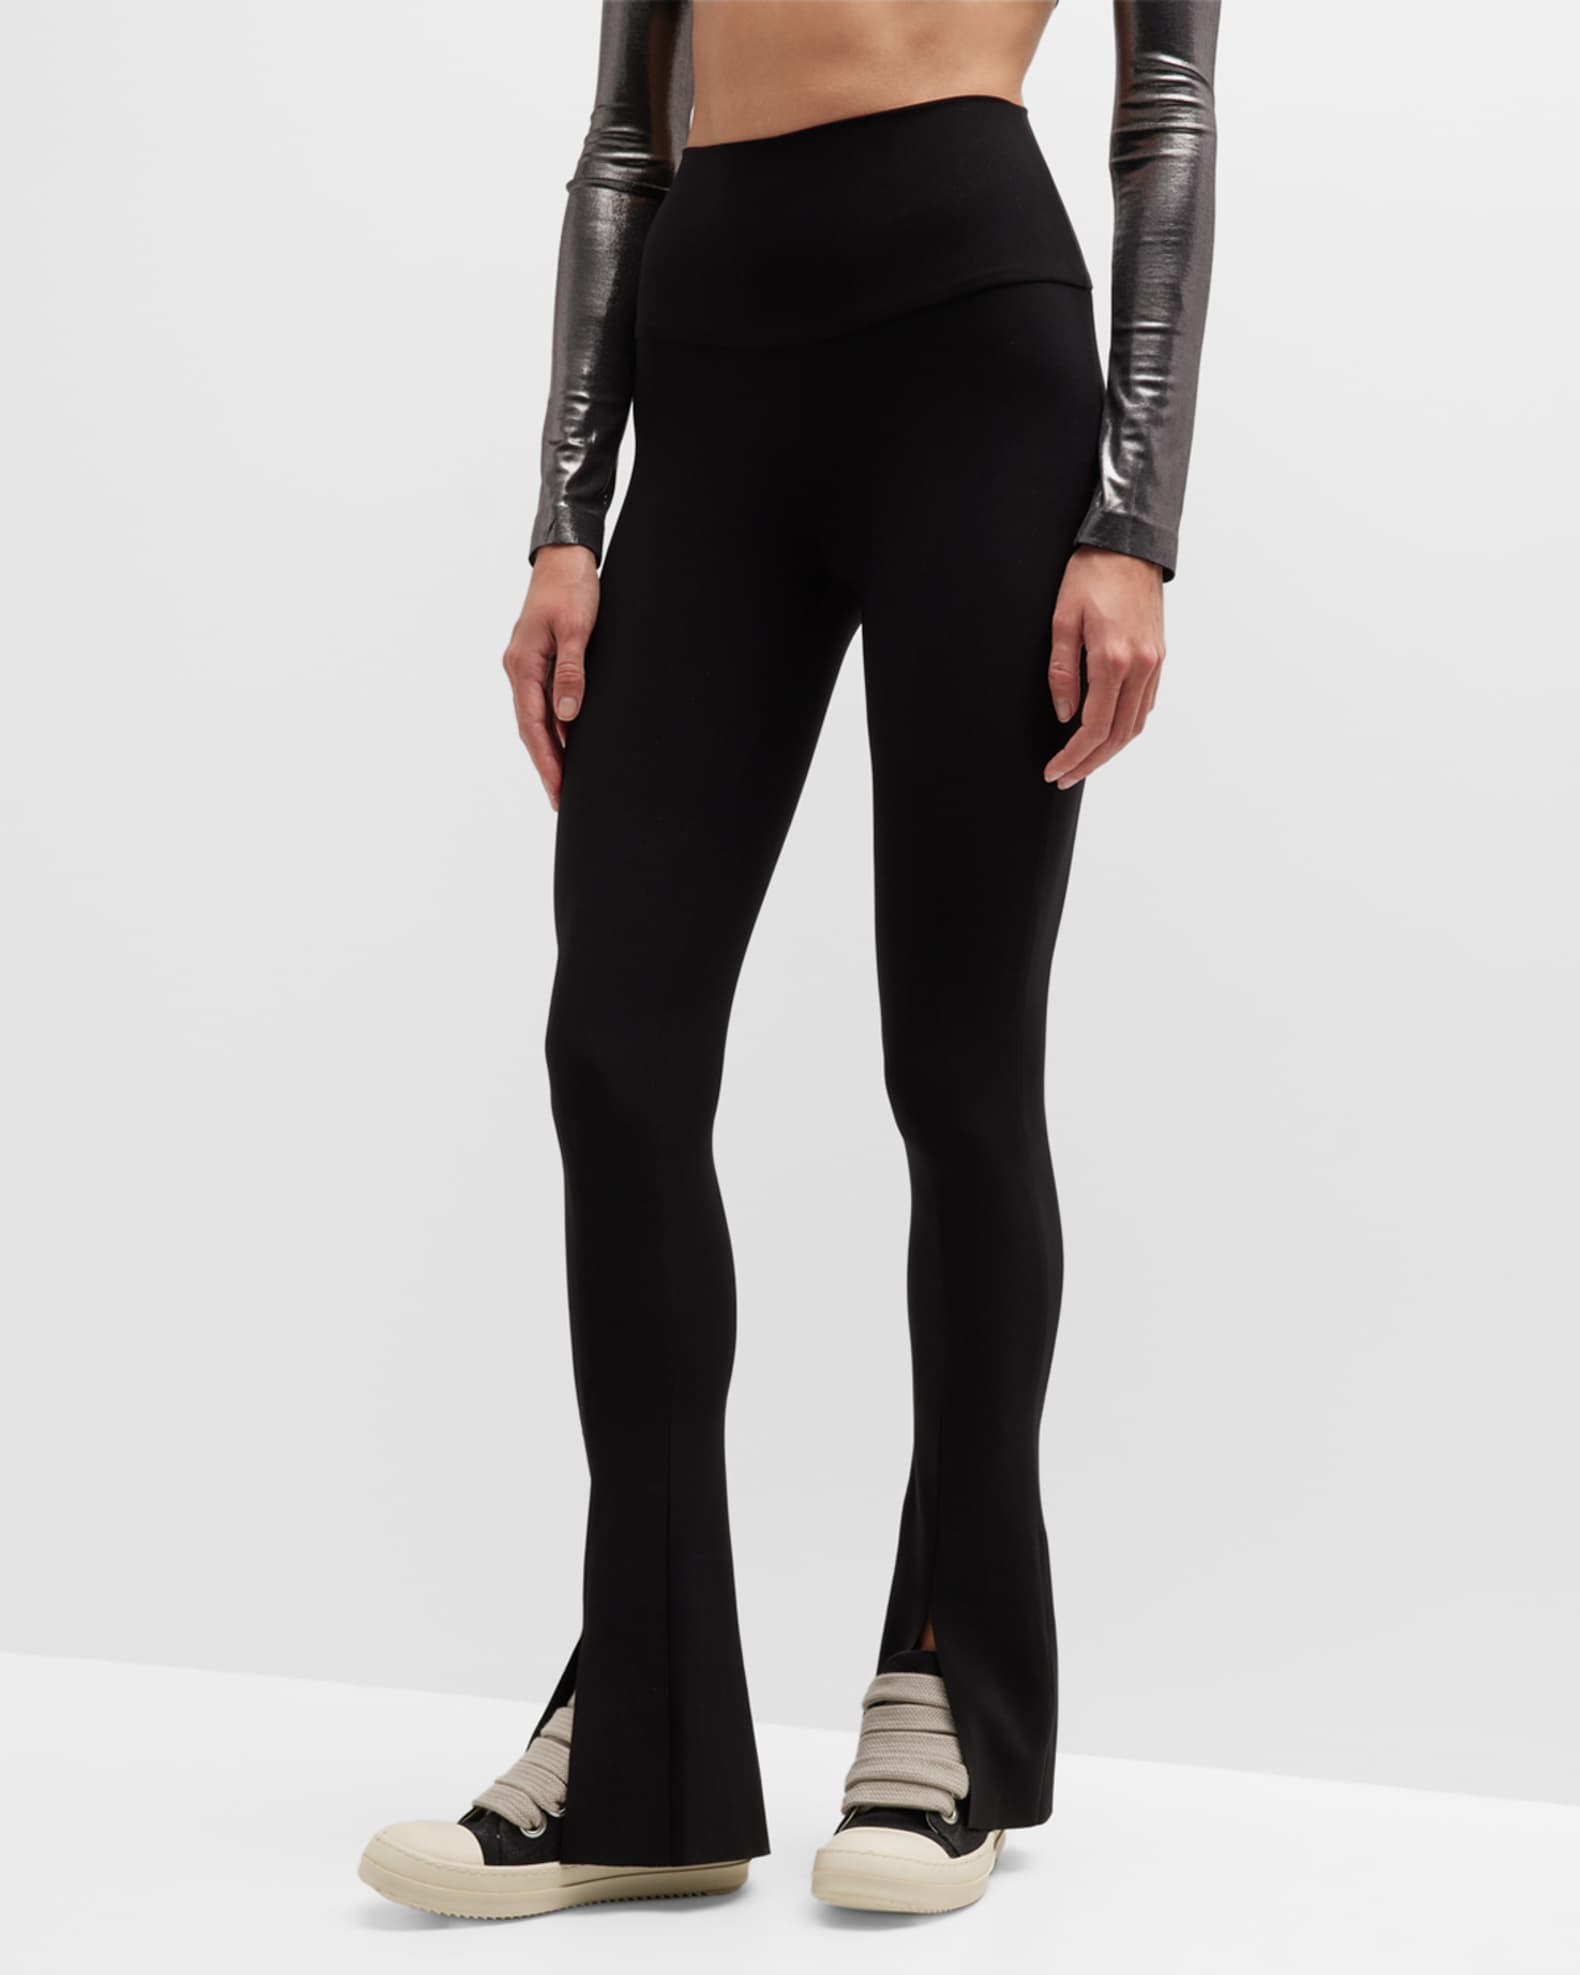 Spat Leggings by Norma Kamali Online, THE ICONIC